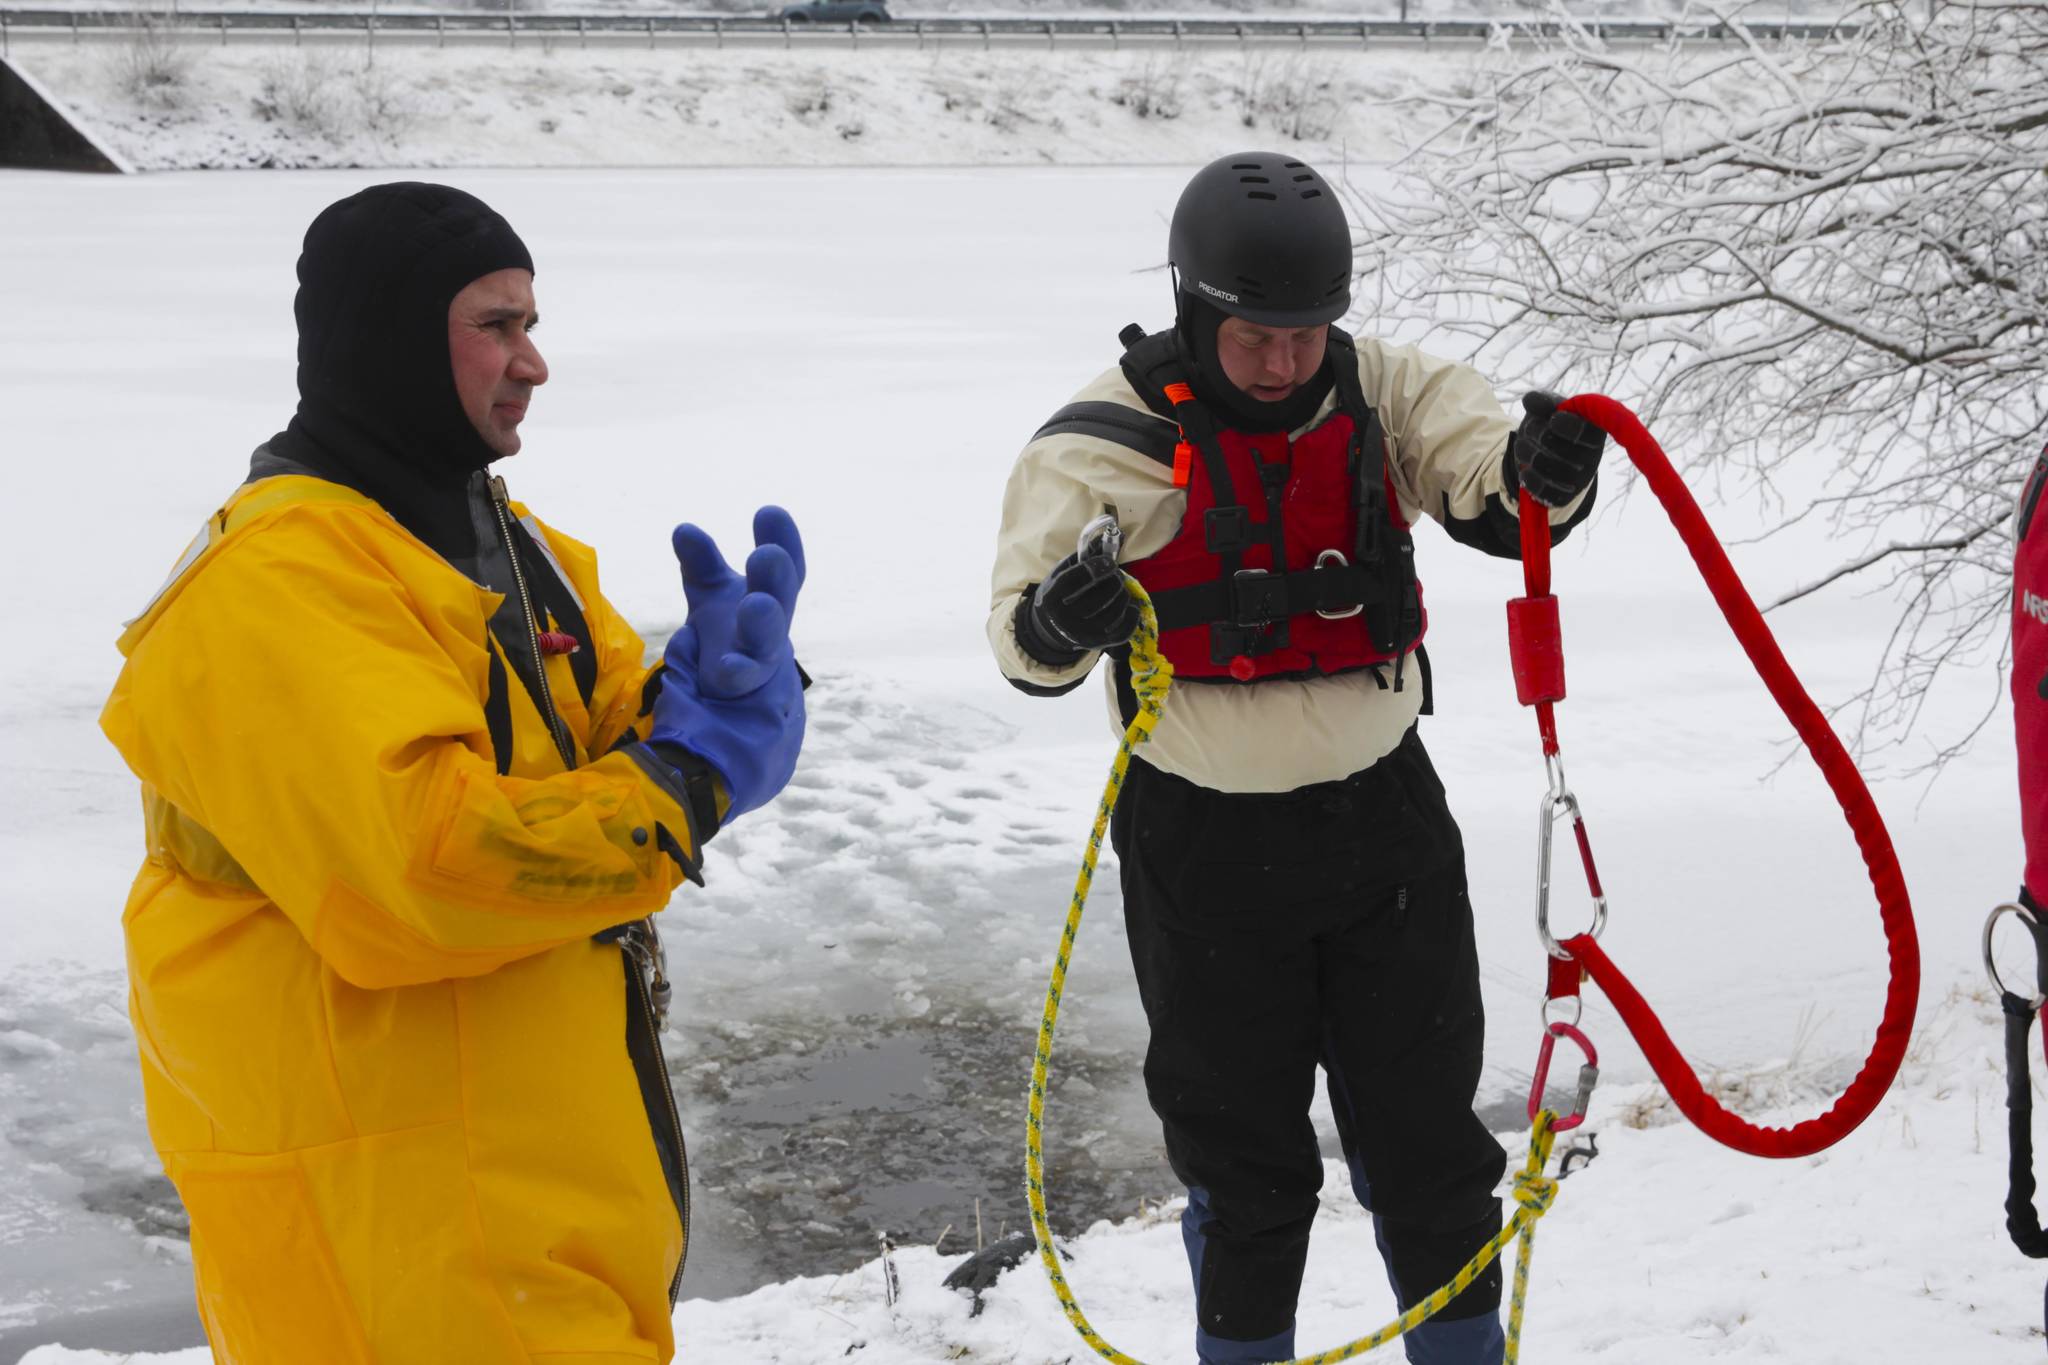 Capt. Jayme Johns, in yellow, head of the Capital City Fire/Rescue’s water rescue team, and Brady Fink, one of the trainers, get kitted up during CCFR’s annual ice rescue training at Twin Lakes on April 7, 2021. (Michael S. Lockett / Juneau Empire)